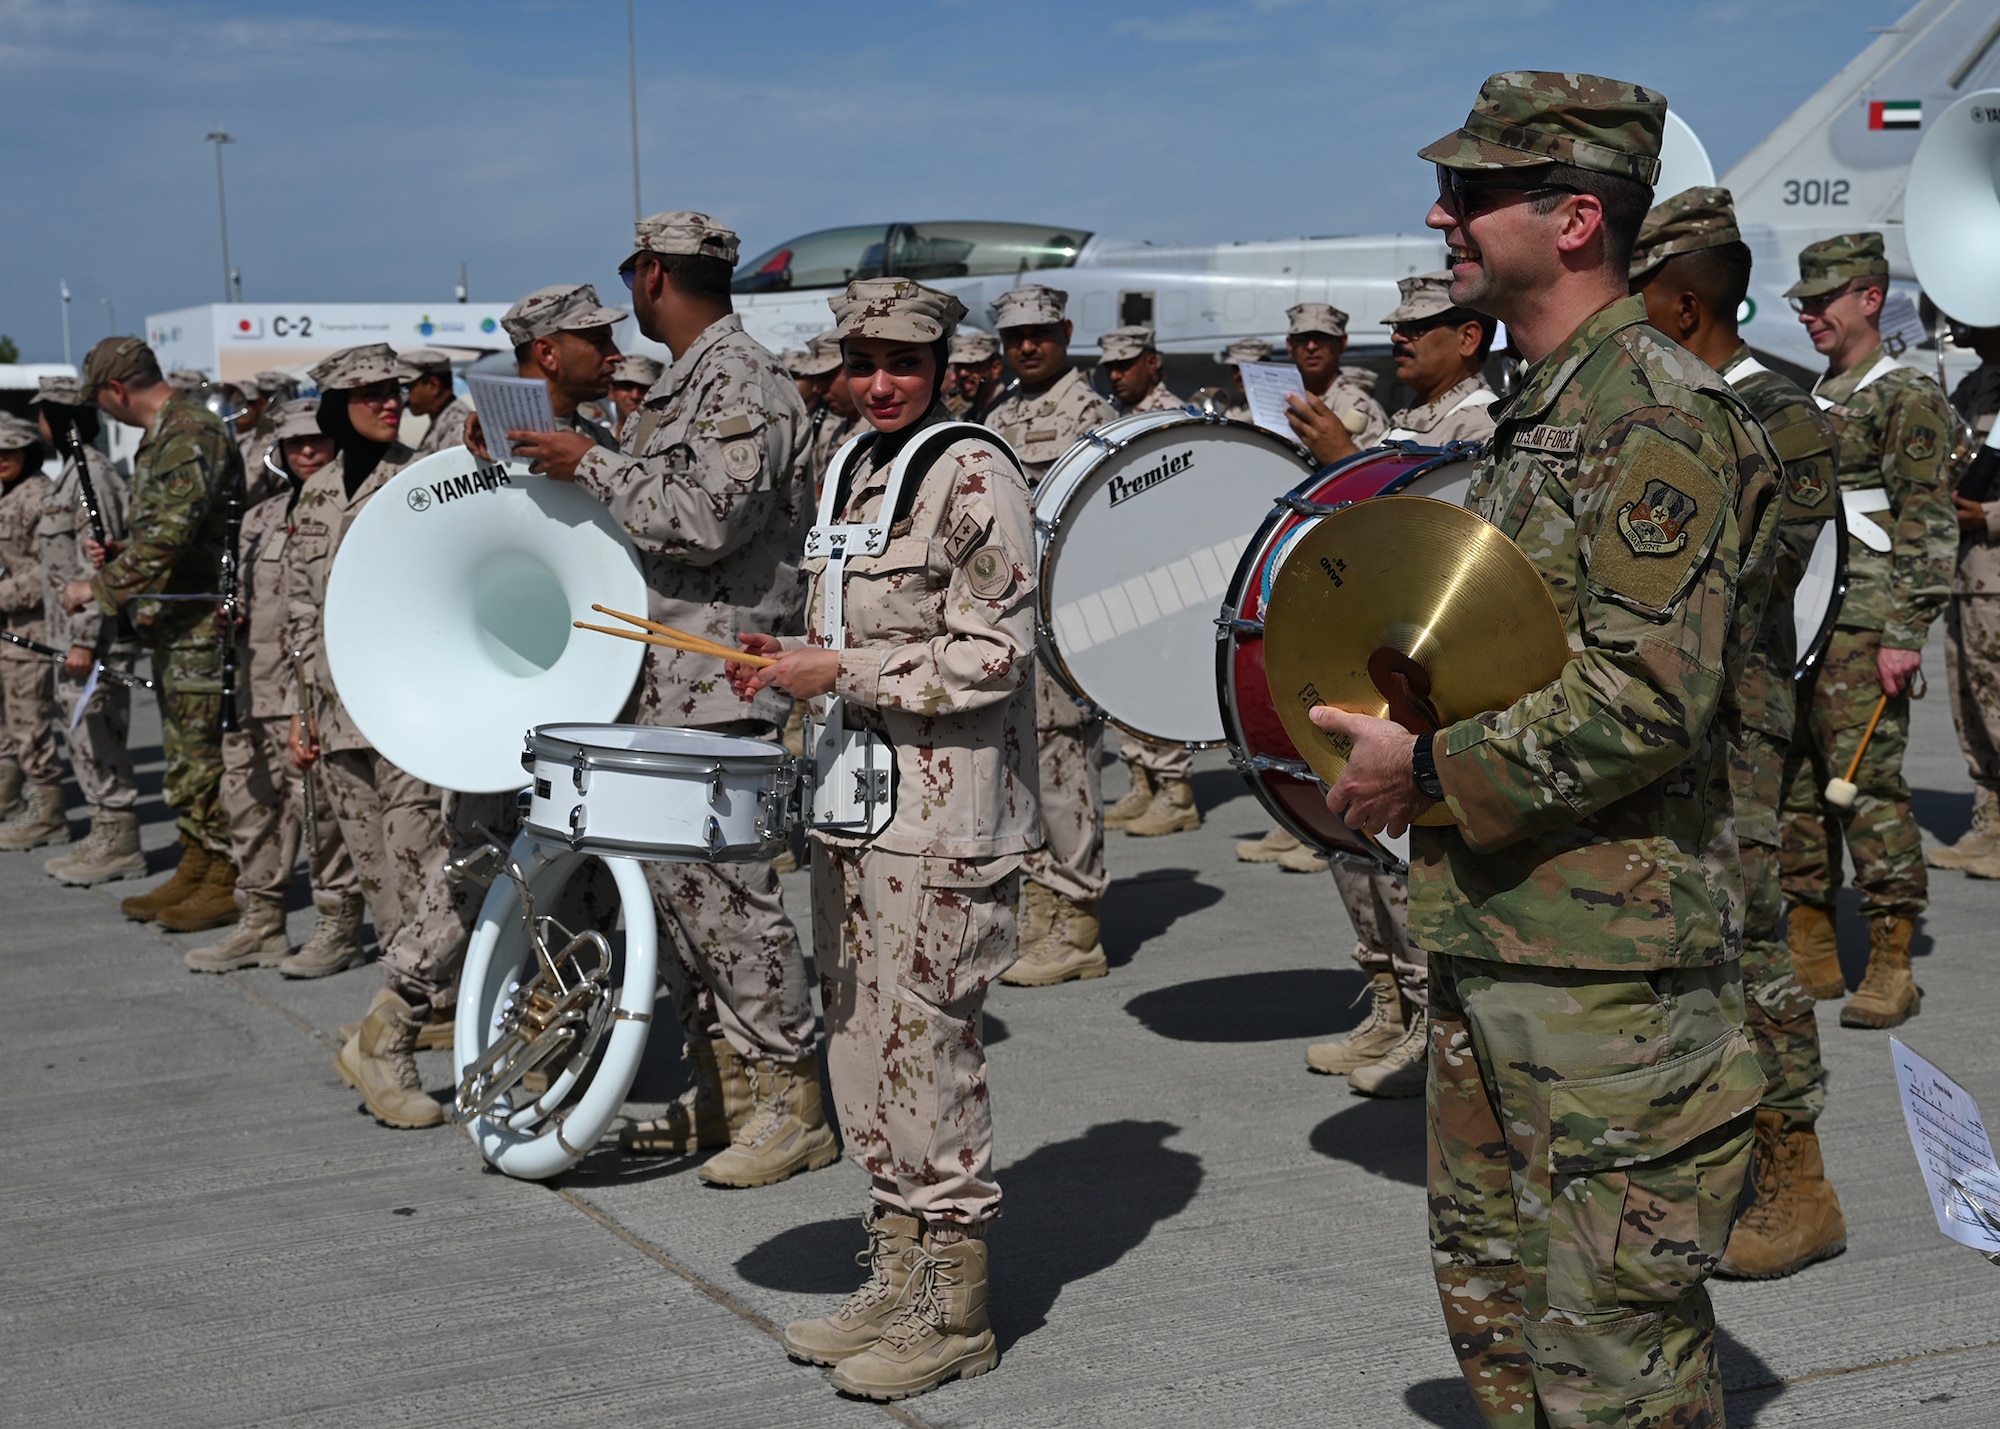 US and UAE band service members practice.